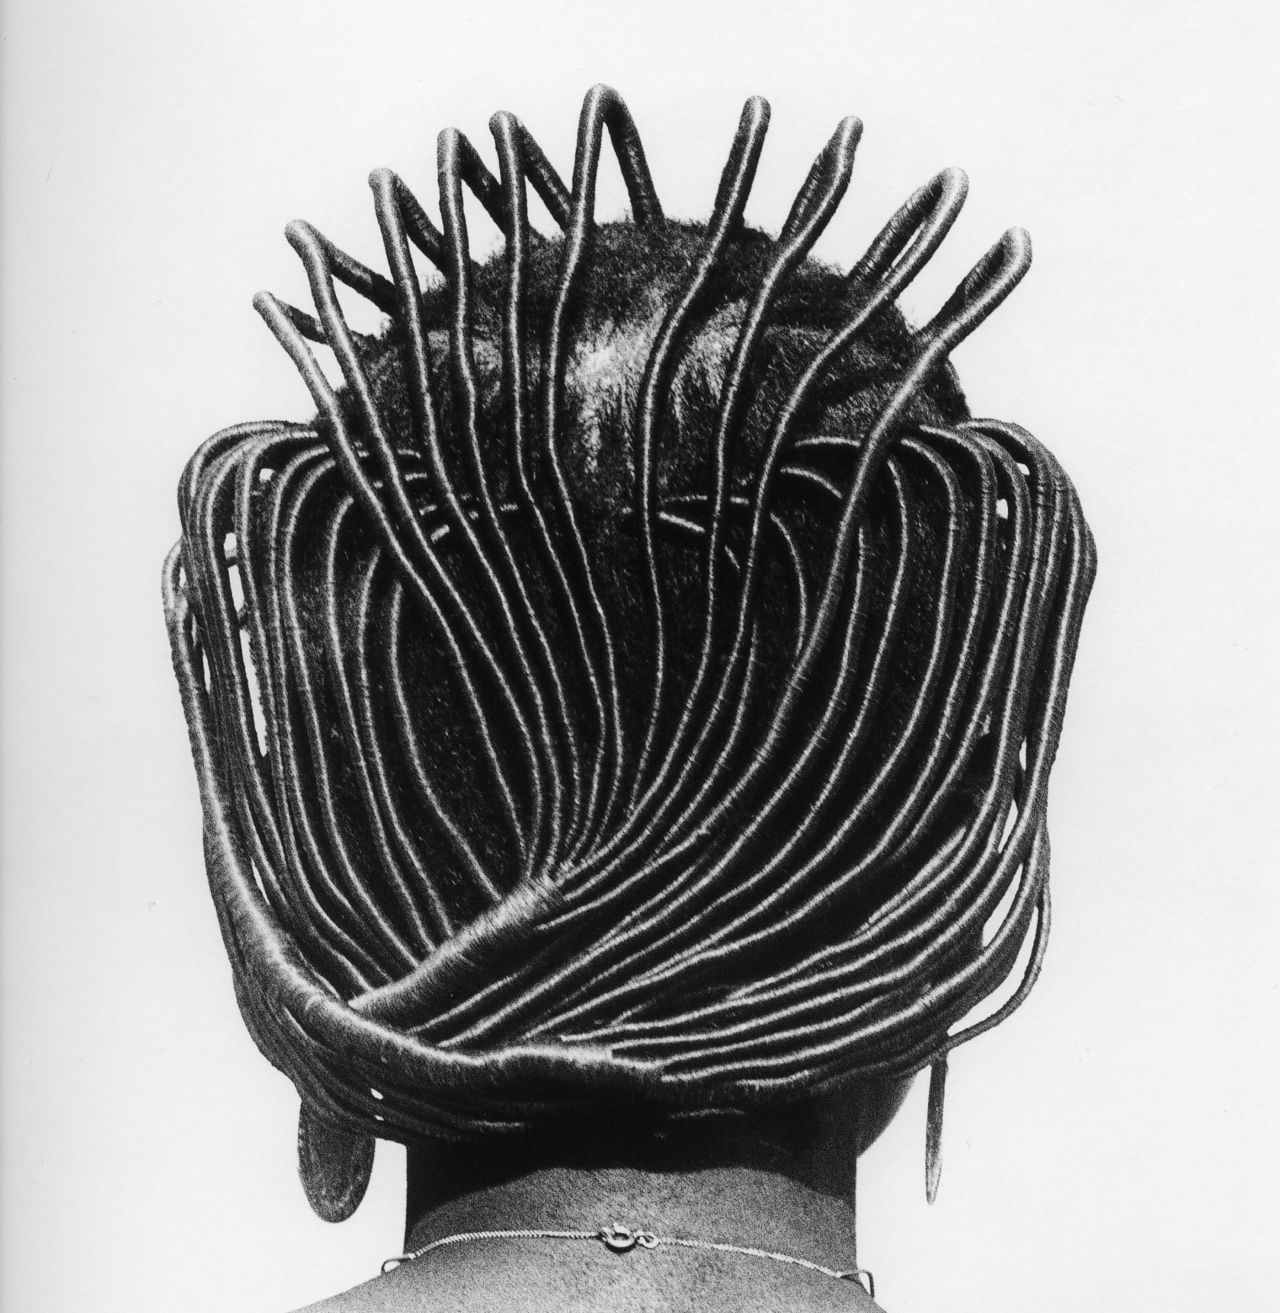 Agaracha, 1974. The black and white images show how intricate the hairstyles are and showcase what are essentially works of art and architecture. 